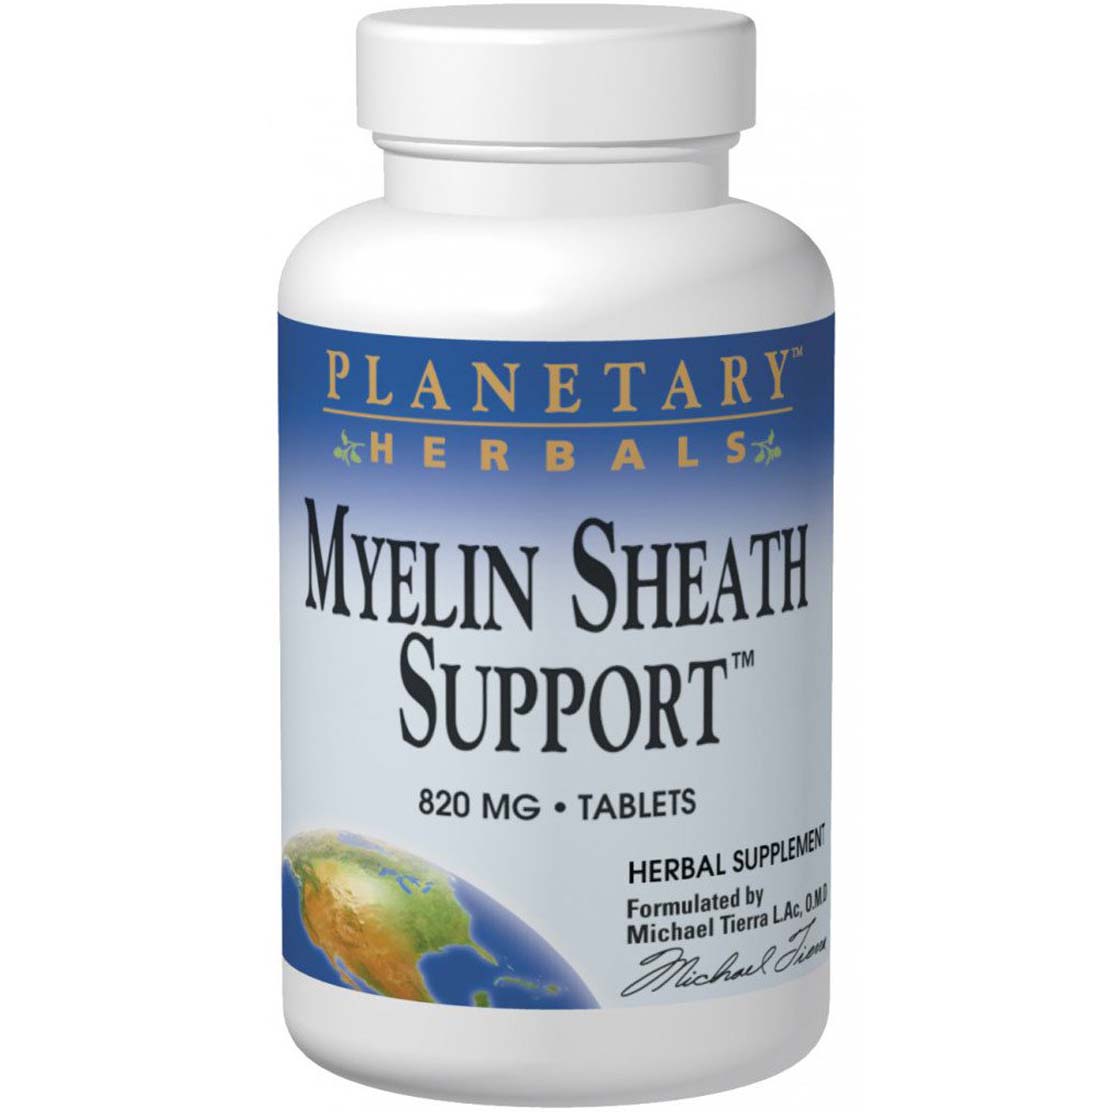 Planetary Herbals Myelin Sheath Support 90 Tablets 820 mg